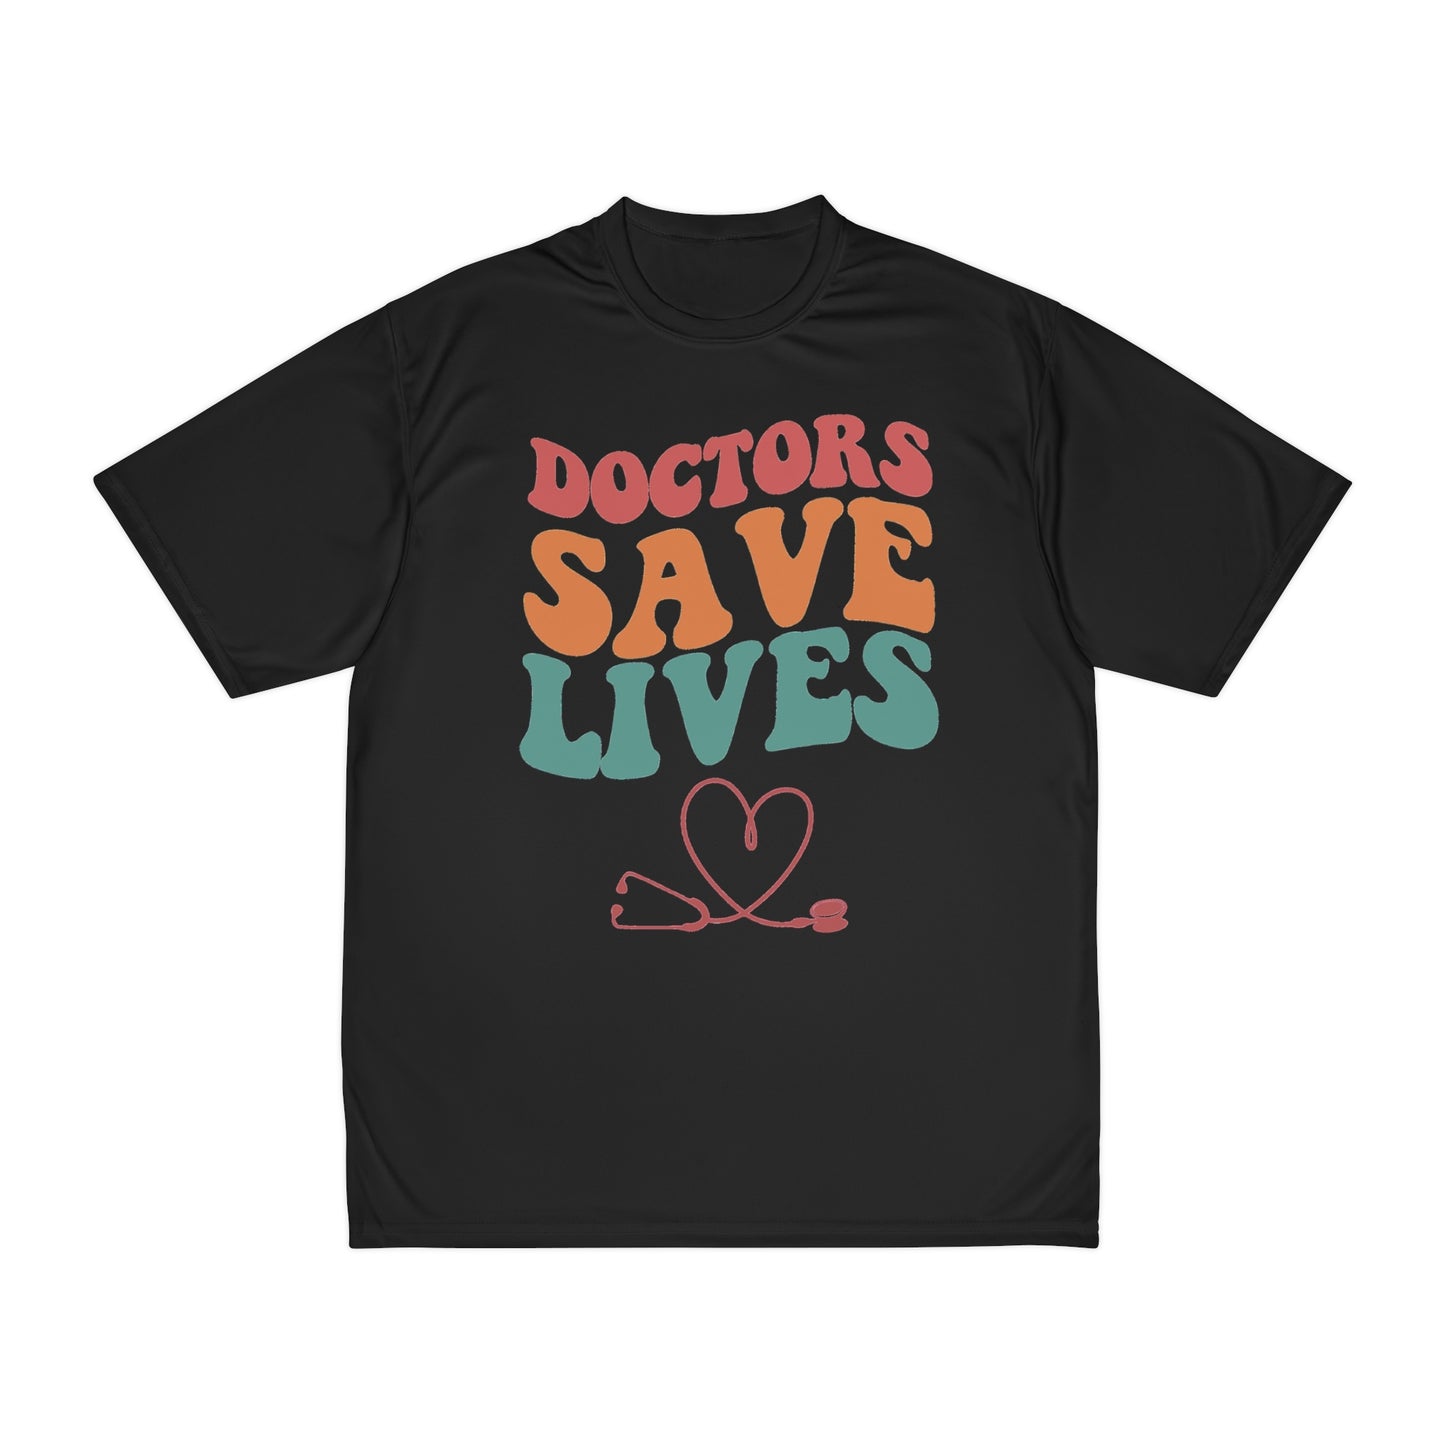 Doctors Save Lives Performance T-Shirt, Doctor shirts, Doctor gift ideas, New Doctor shirt, Future doctor shirt, gift for doctors